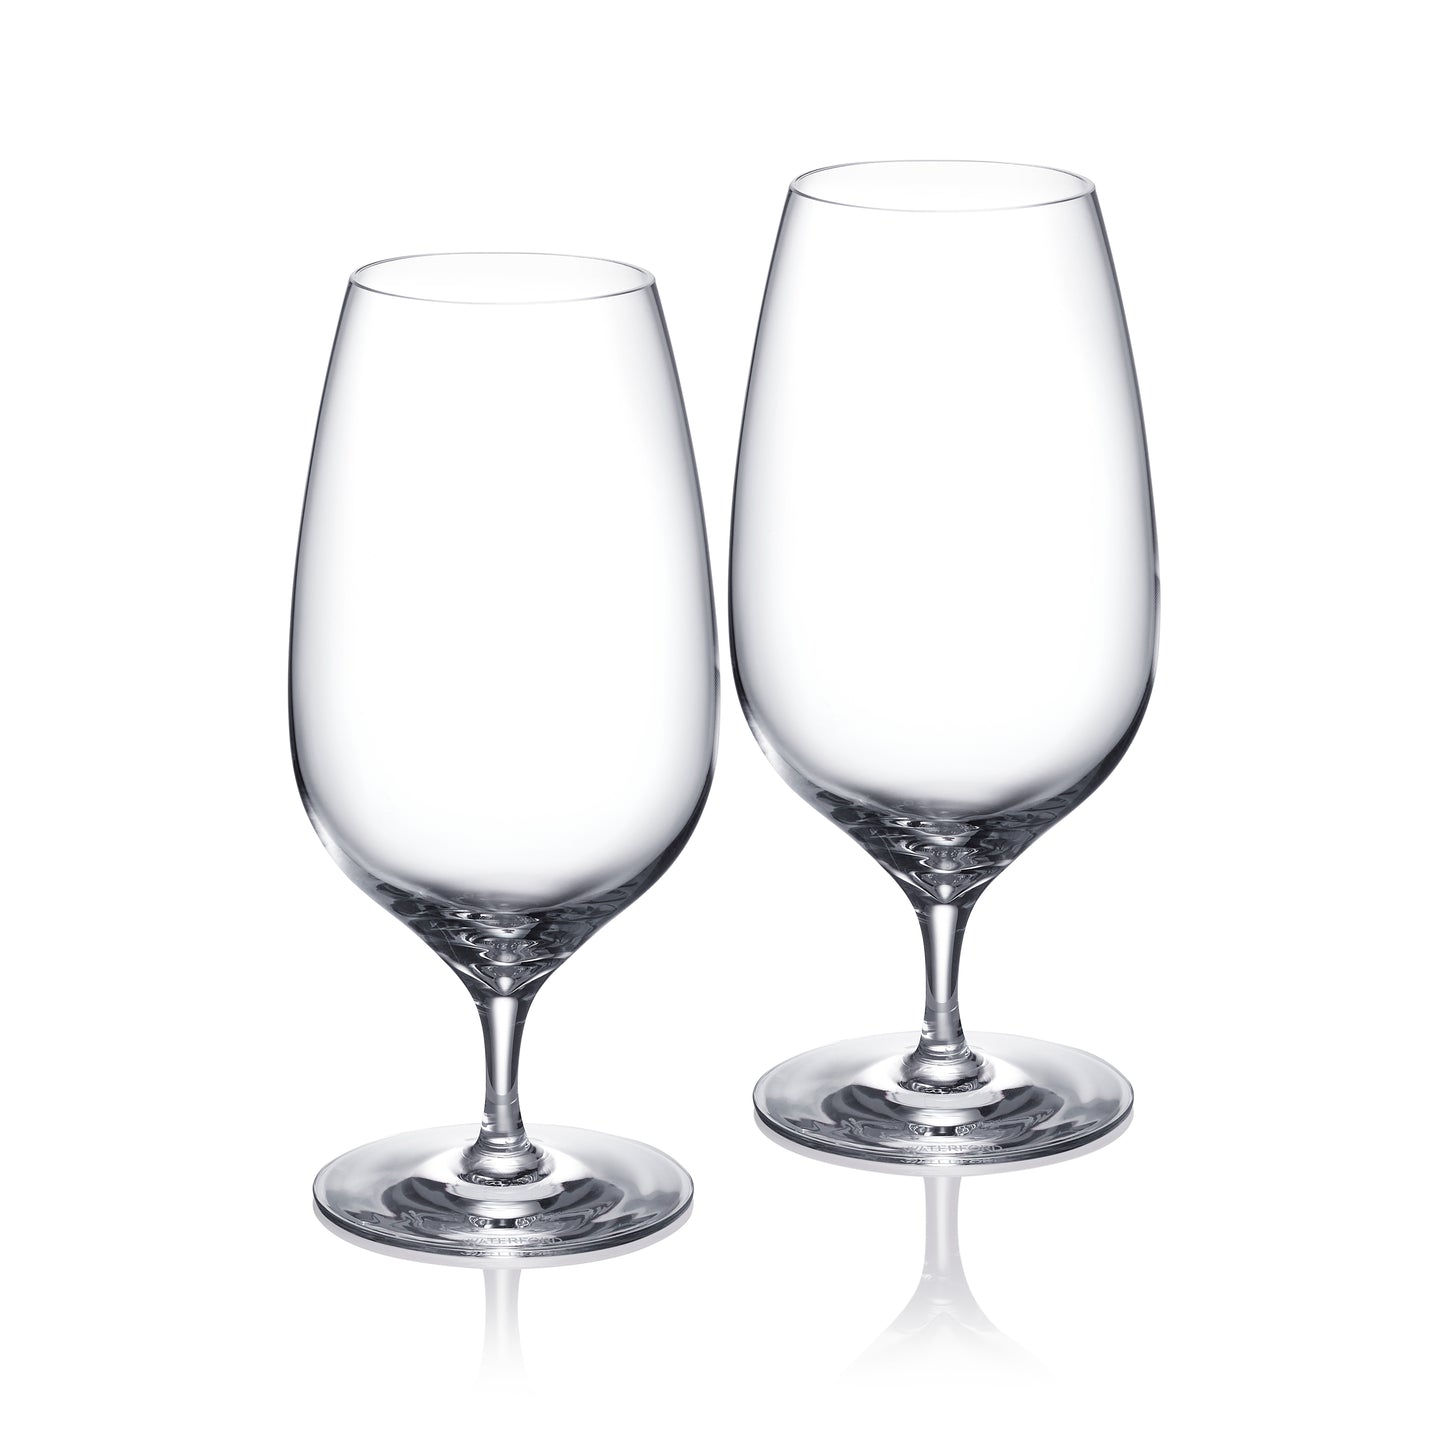 Waterford Craft Brew Stemmed Beer Glass 600ml, Set of 2